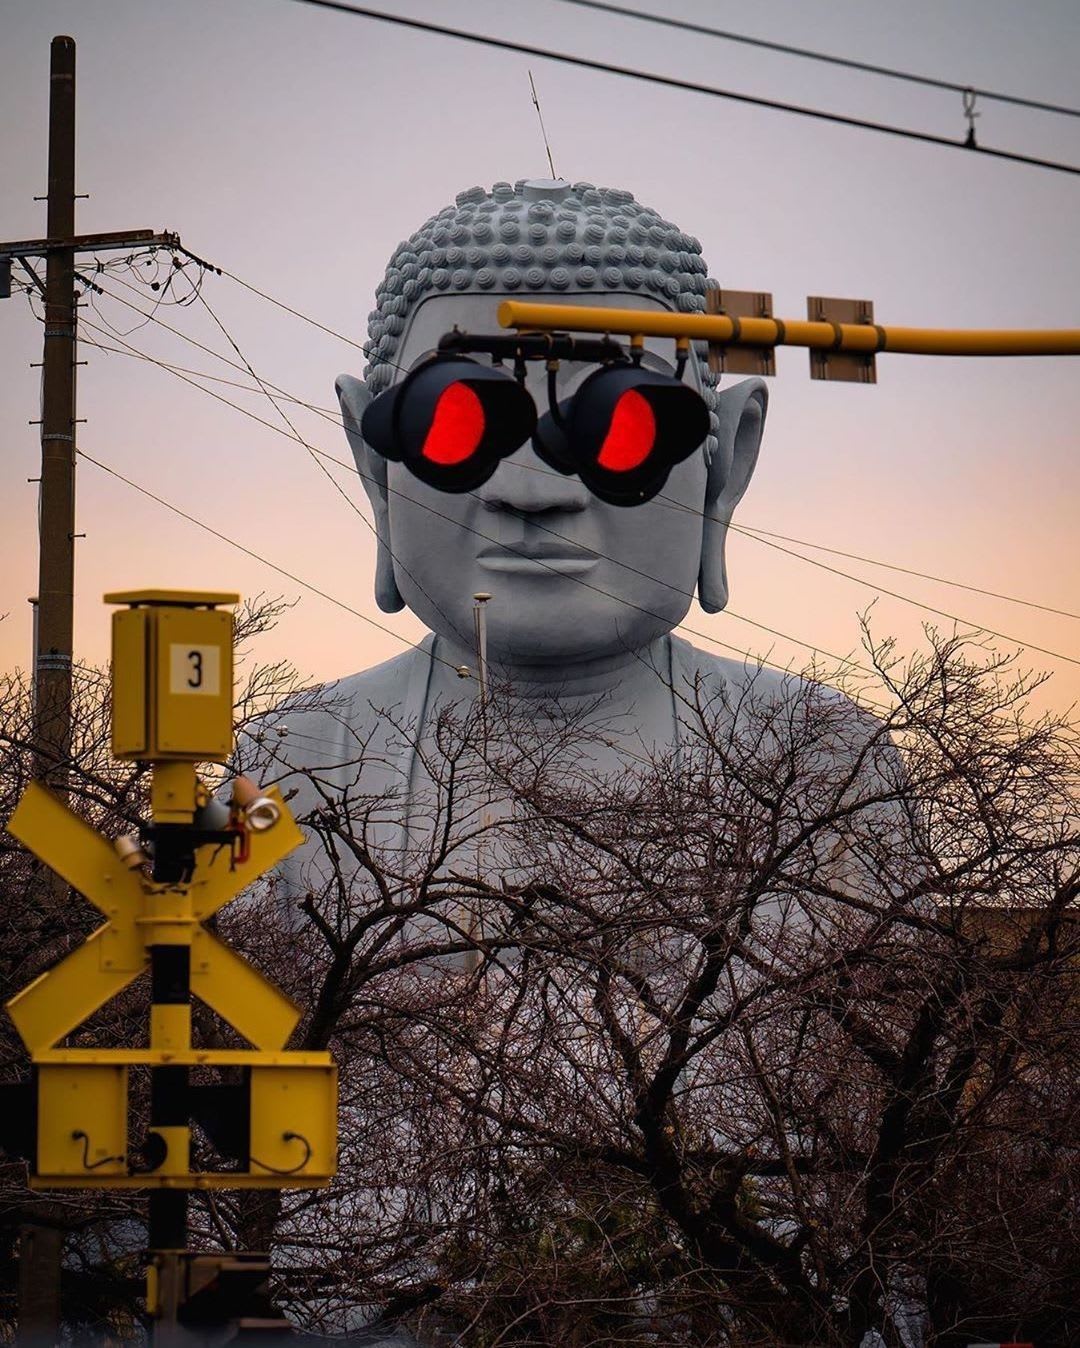 Buddha looks good in shades. 📸: Hisa (@ag.lr.88) h/t: Colossal (@colossal) 🕶 #photography #photographylovers #photographysouls #photograph… | Aichi, Japan, Buddha